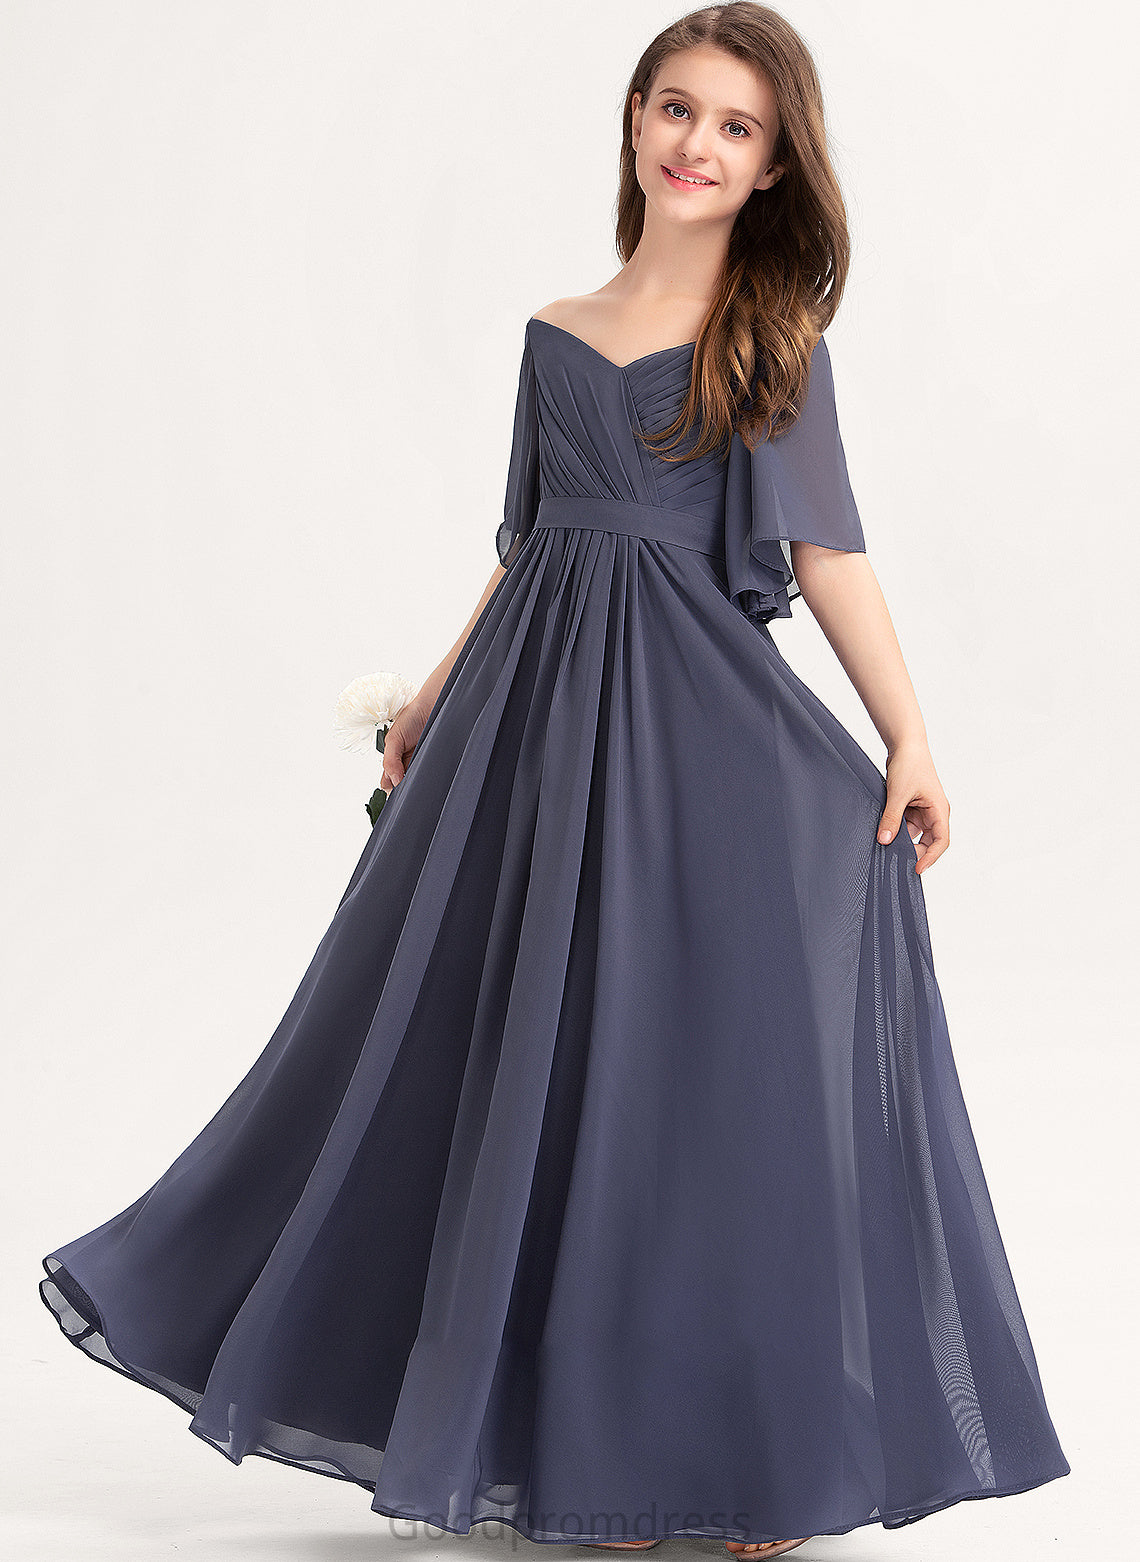 Bow(s) With A-Line Junior Bridesmaid Dresses Off-the-Shoulder Chiffon Floor-Length Magdalena Ruffle